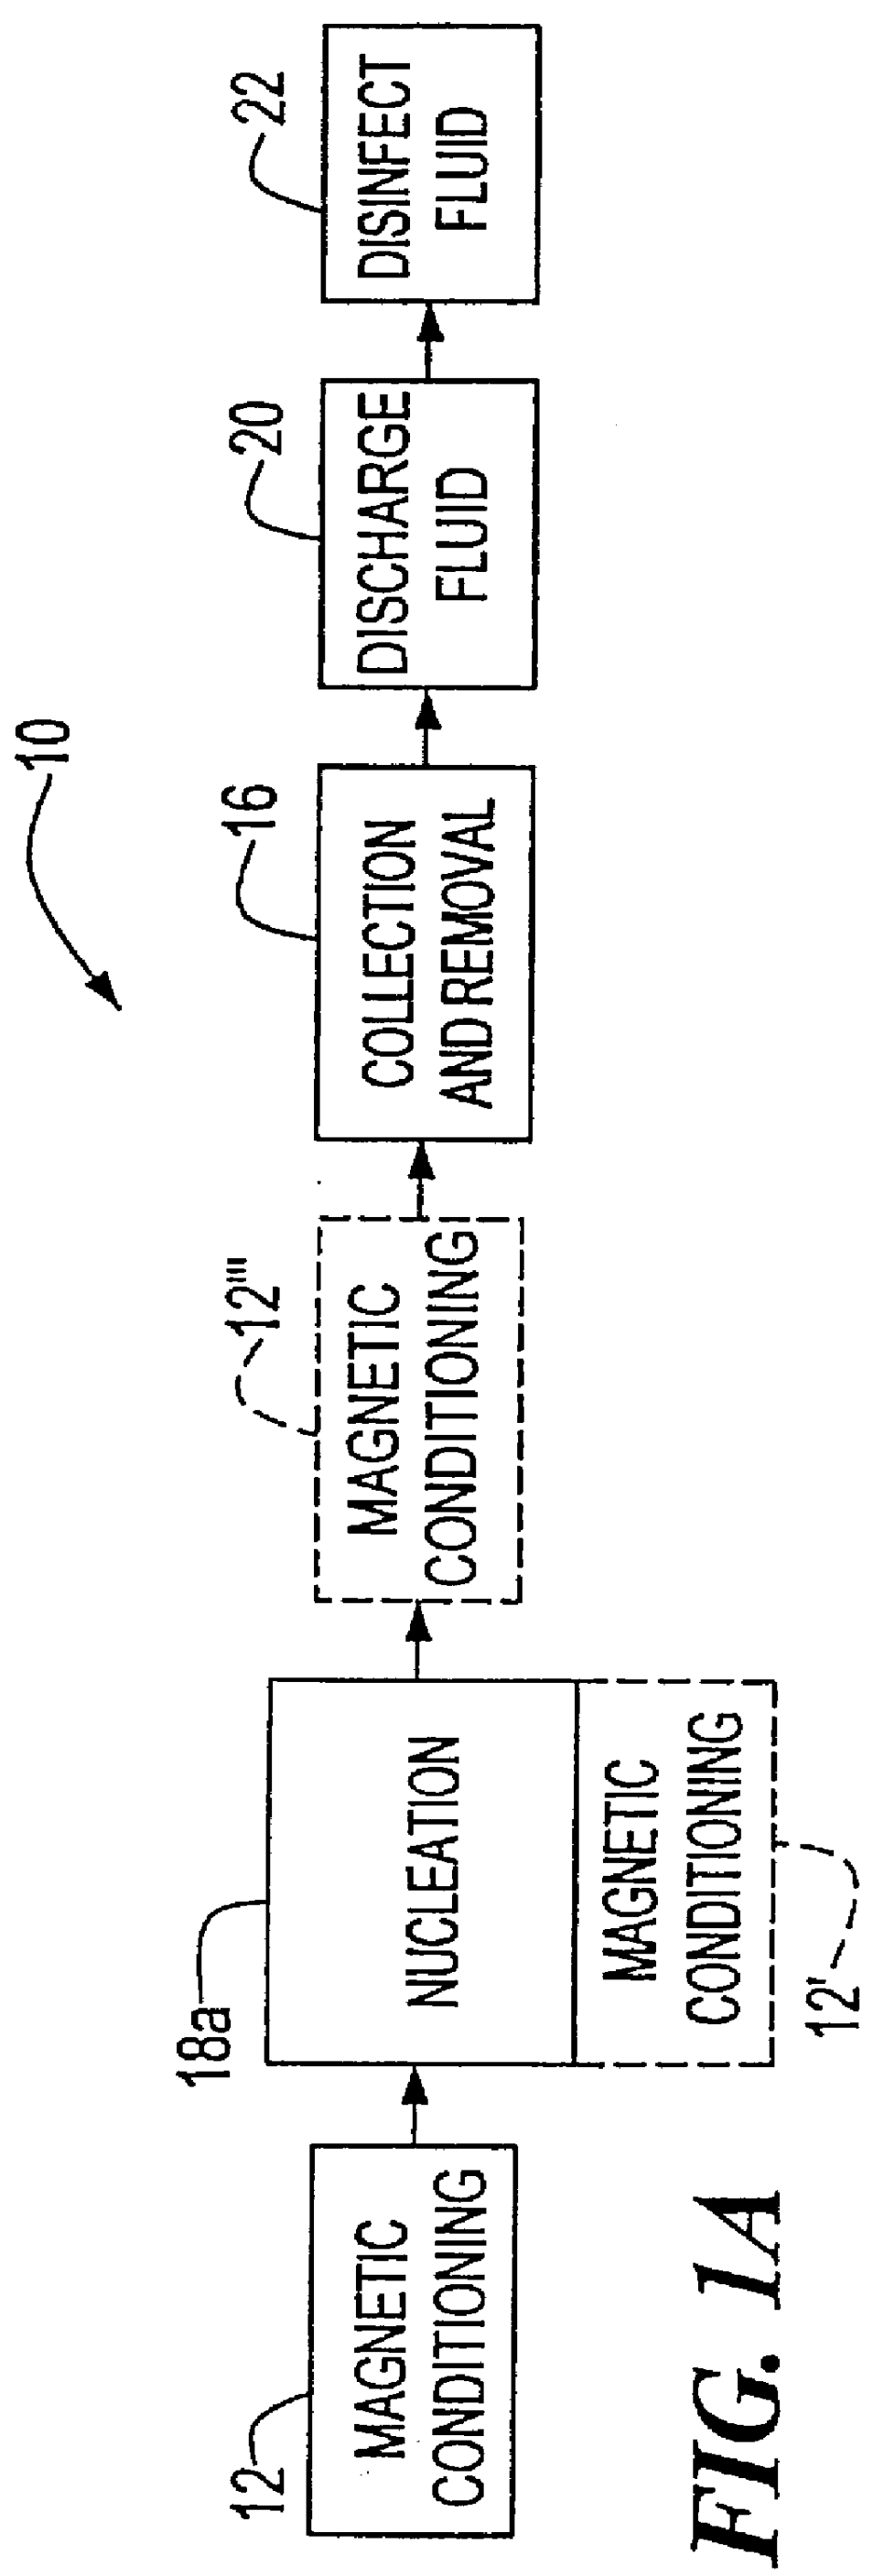 Method and system for removing solutes from a fluid using magnetically conditioned coagulation